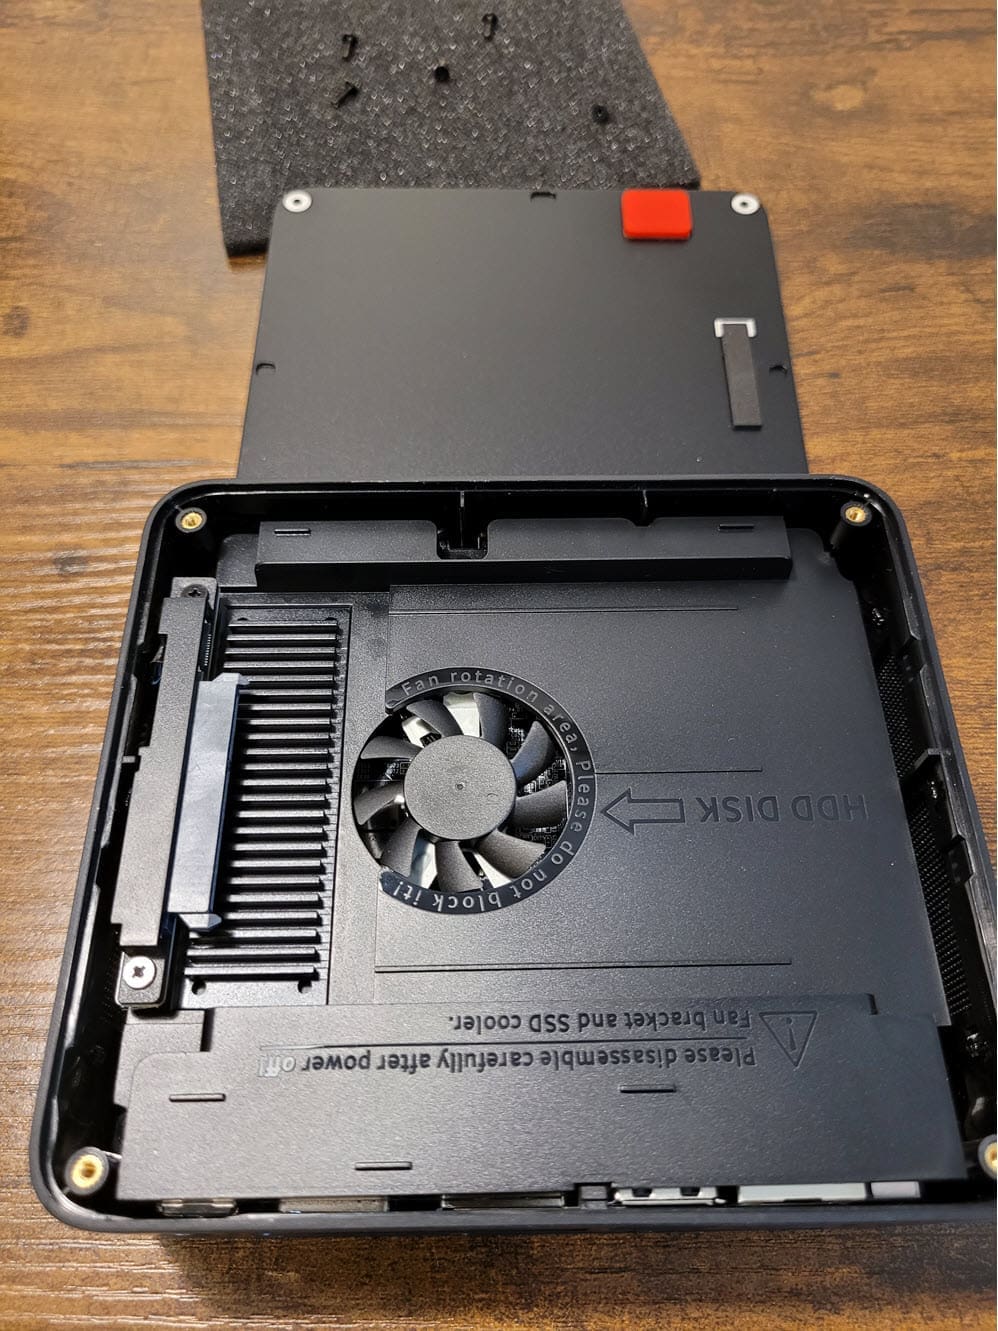 Bottom cover removed and viewing fan shroud